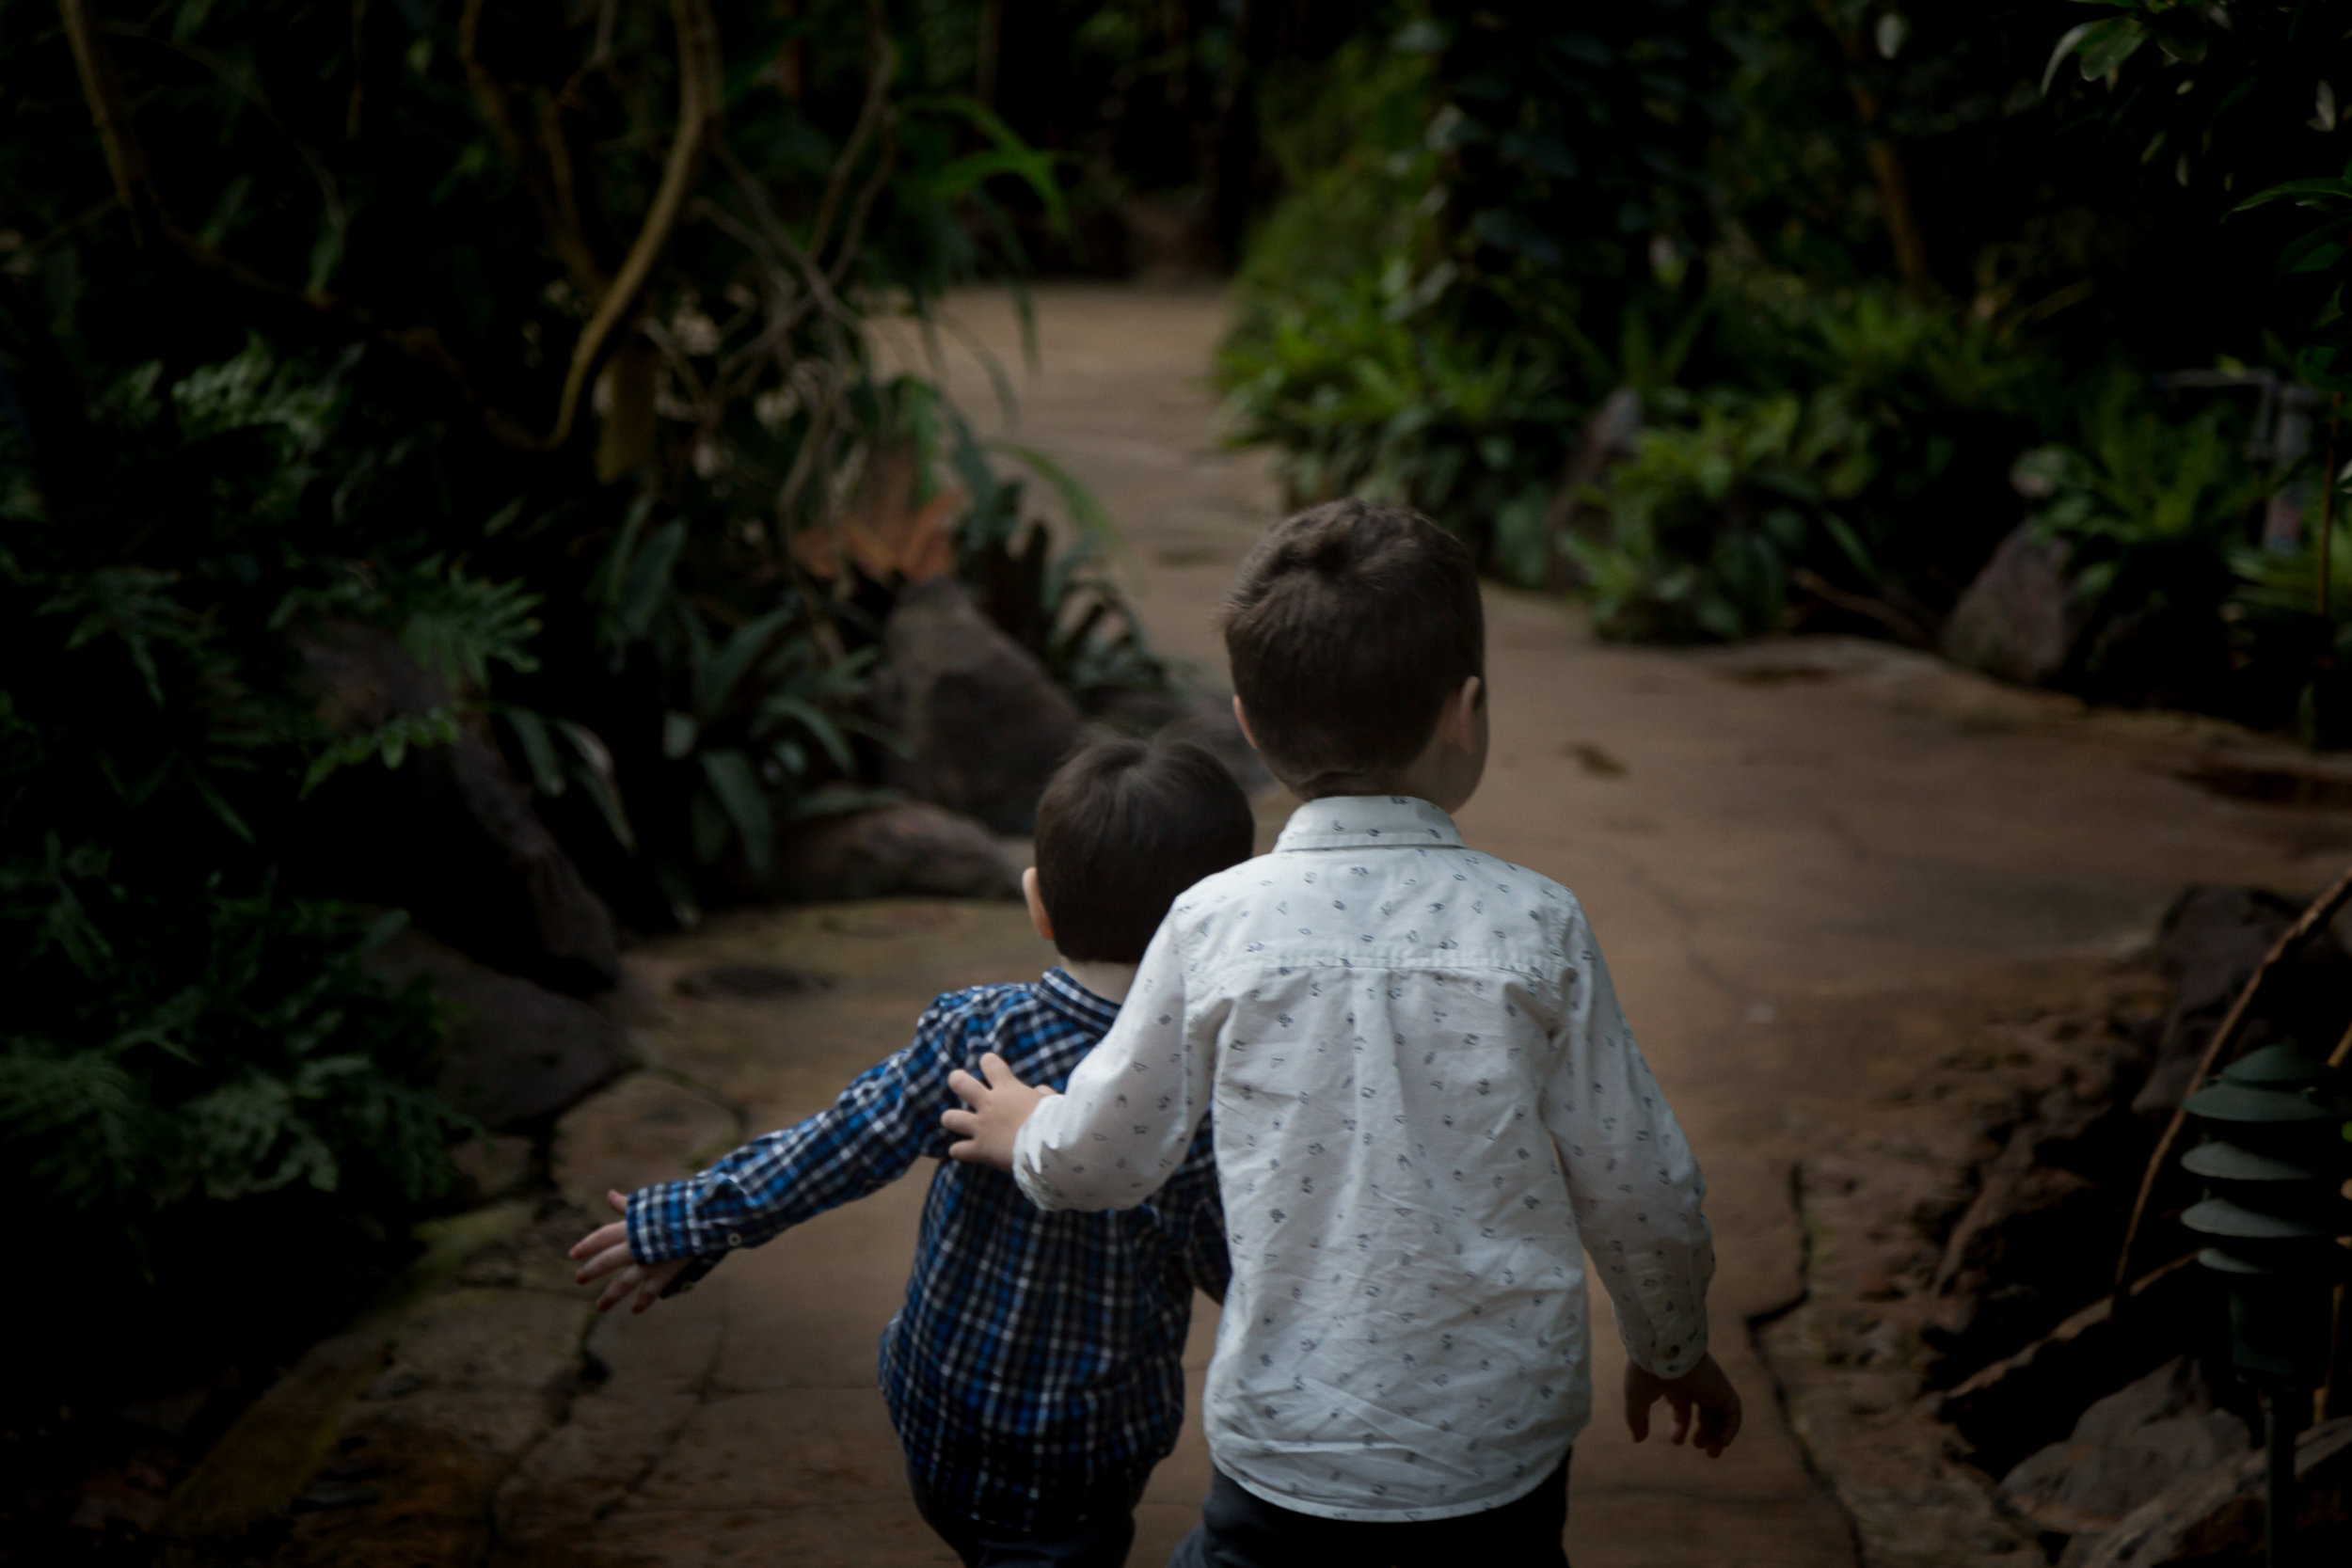 Chicago_Photographer_Garfield_Park_Conservatory_Family_Holiday-10.jpg